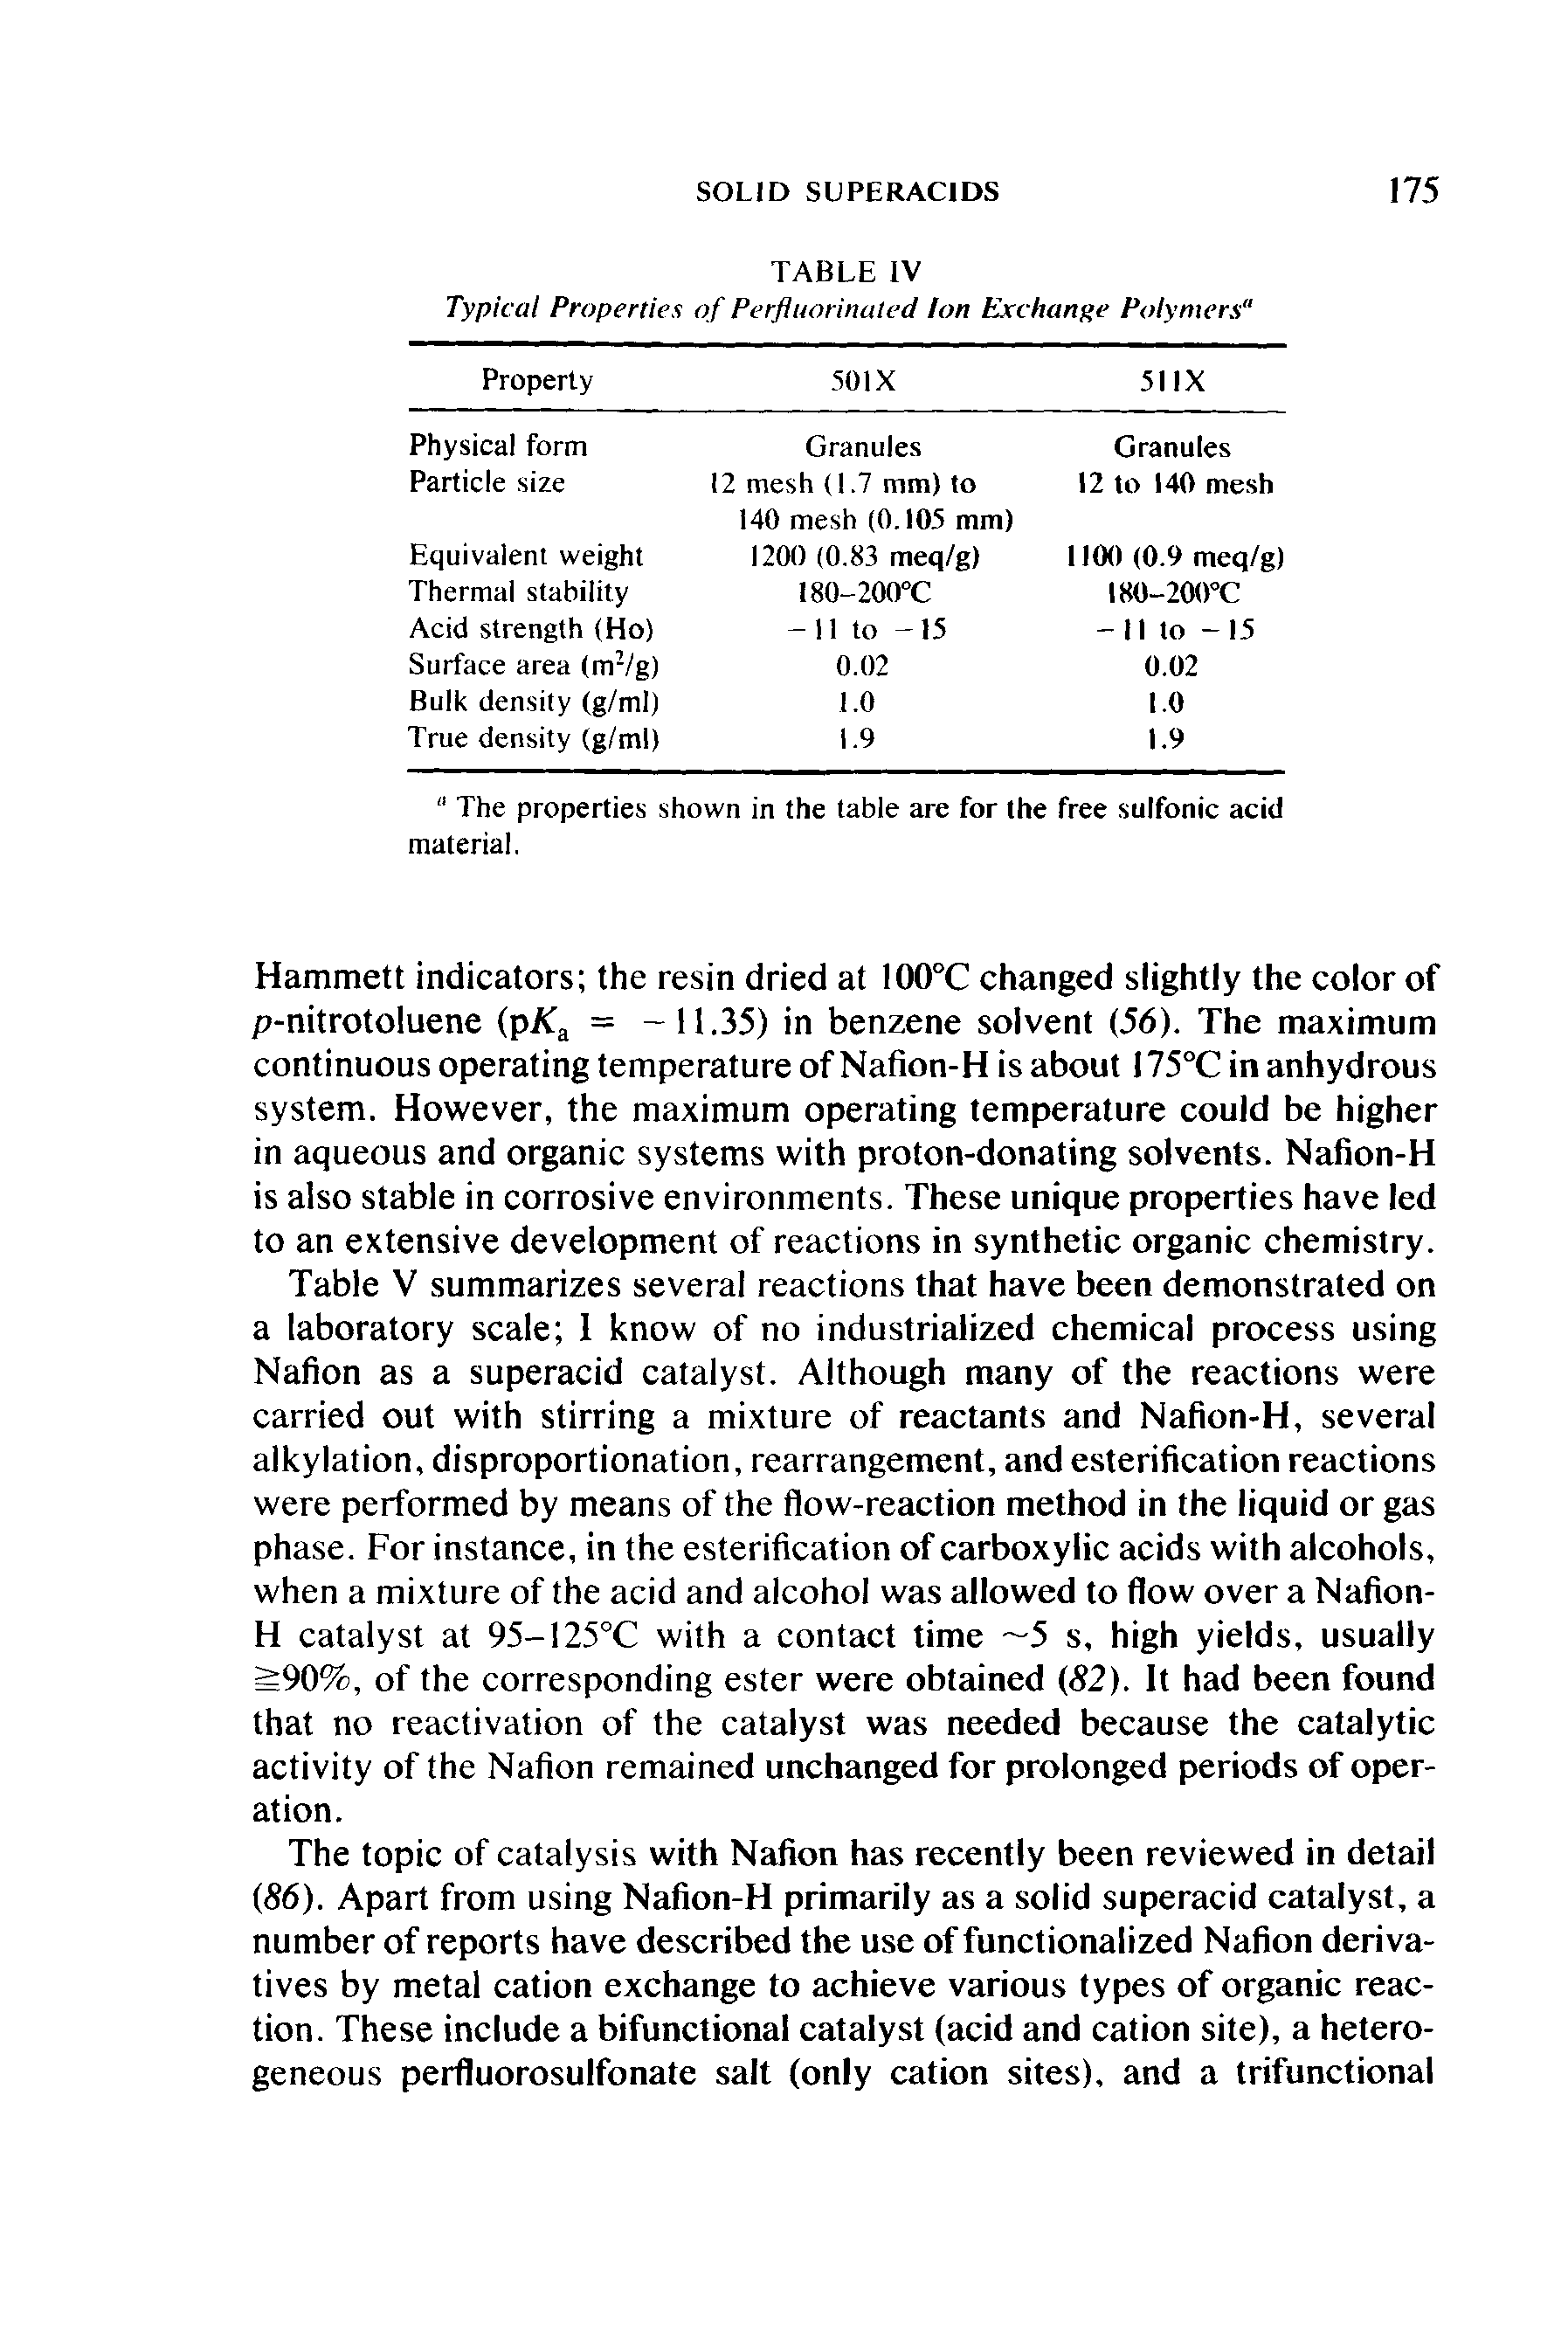 Table V summarizes several reactions that have been demonstrated on a laboratory scale 1 know of no industrialized chemical process using Nafion as a superacid catalyst. Although many of the reactions were carried out with stirring a mixture of reactants and Nafion-H, several alkylation, disproportionation, rearrangement, and esterification reactions were performed by means of the flow-reaction method in the liquid or gas phase. For instance, in the esterification of carboxylic acids with alcohols, when a mixture of the acid and alcohol was allowed to flow over a Nafion-H catalyst at 95-125°C with a contact time 5 s, high yields, usually S90%, of the corresponding ester were obtained (82). It had been found that no reactivation of the catalyst was needed because the catalytic activity of the Nafion remained unchanged for prolonged periods of operation.